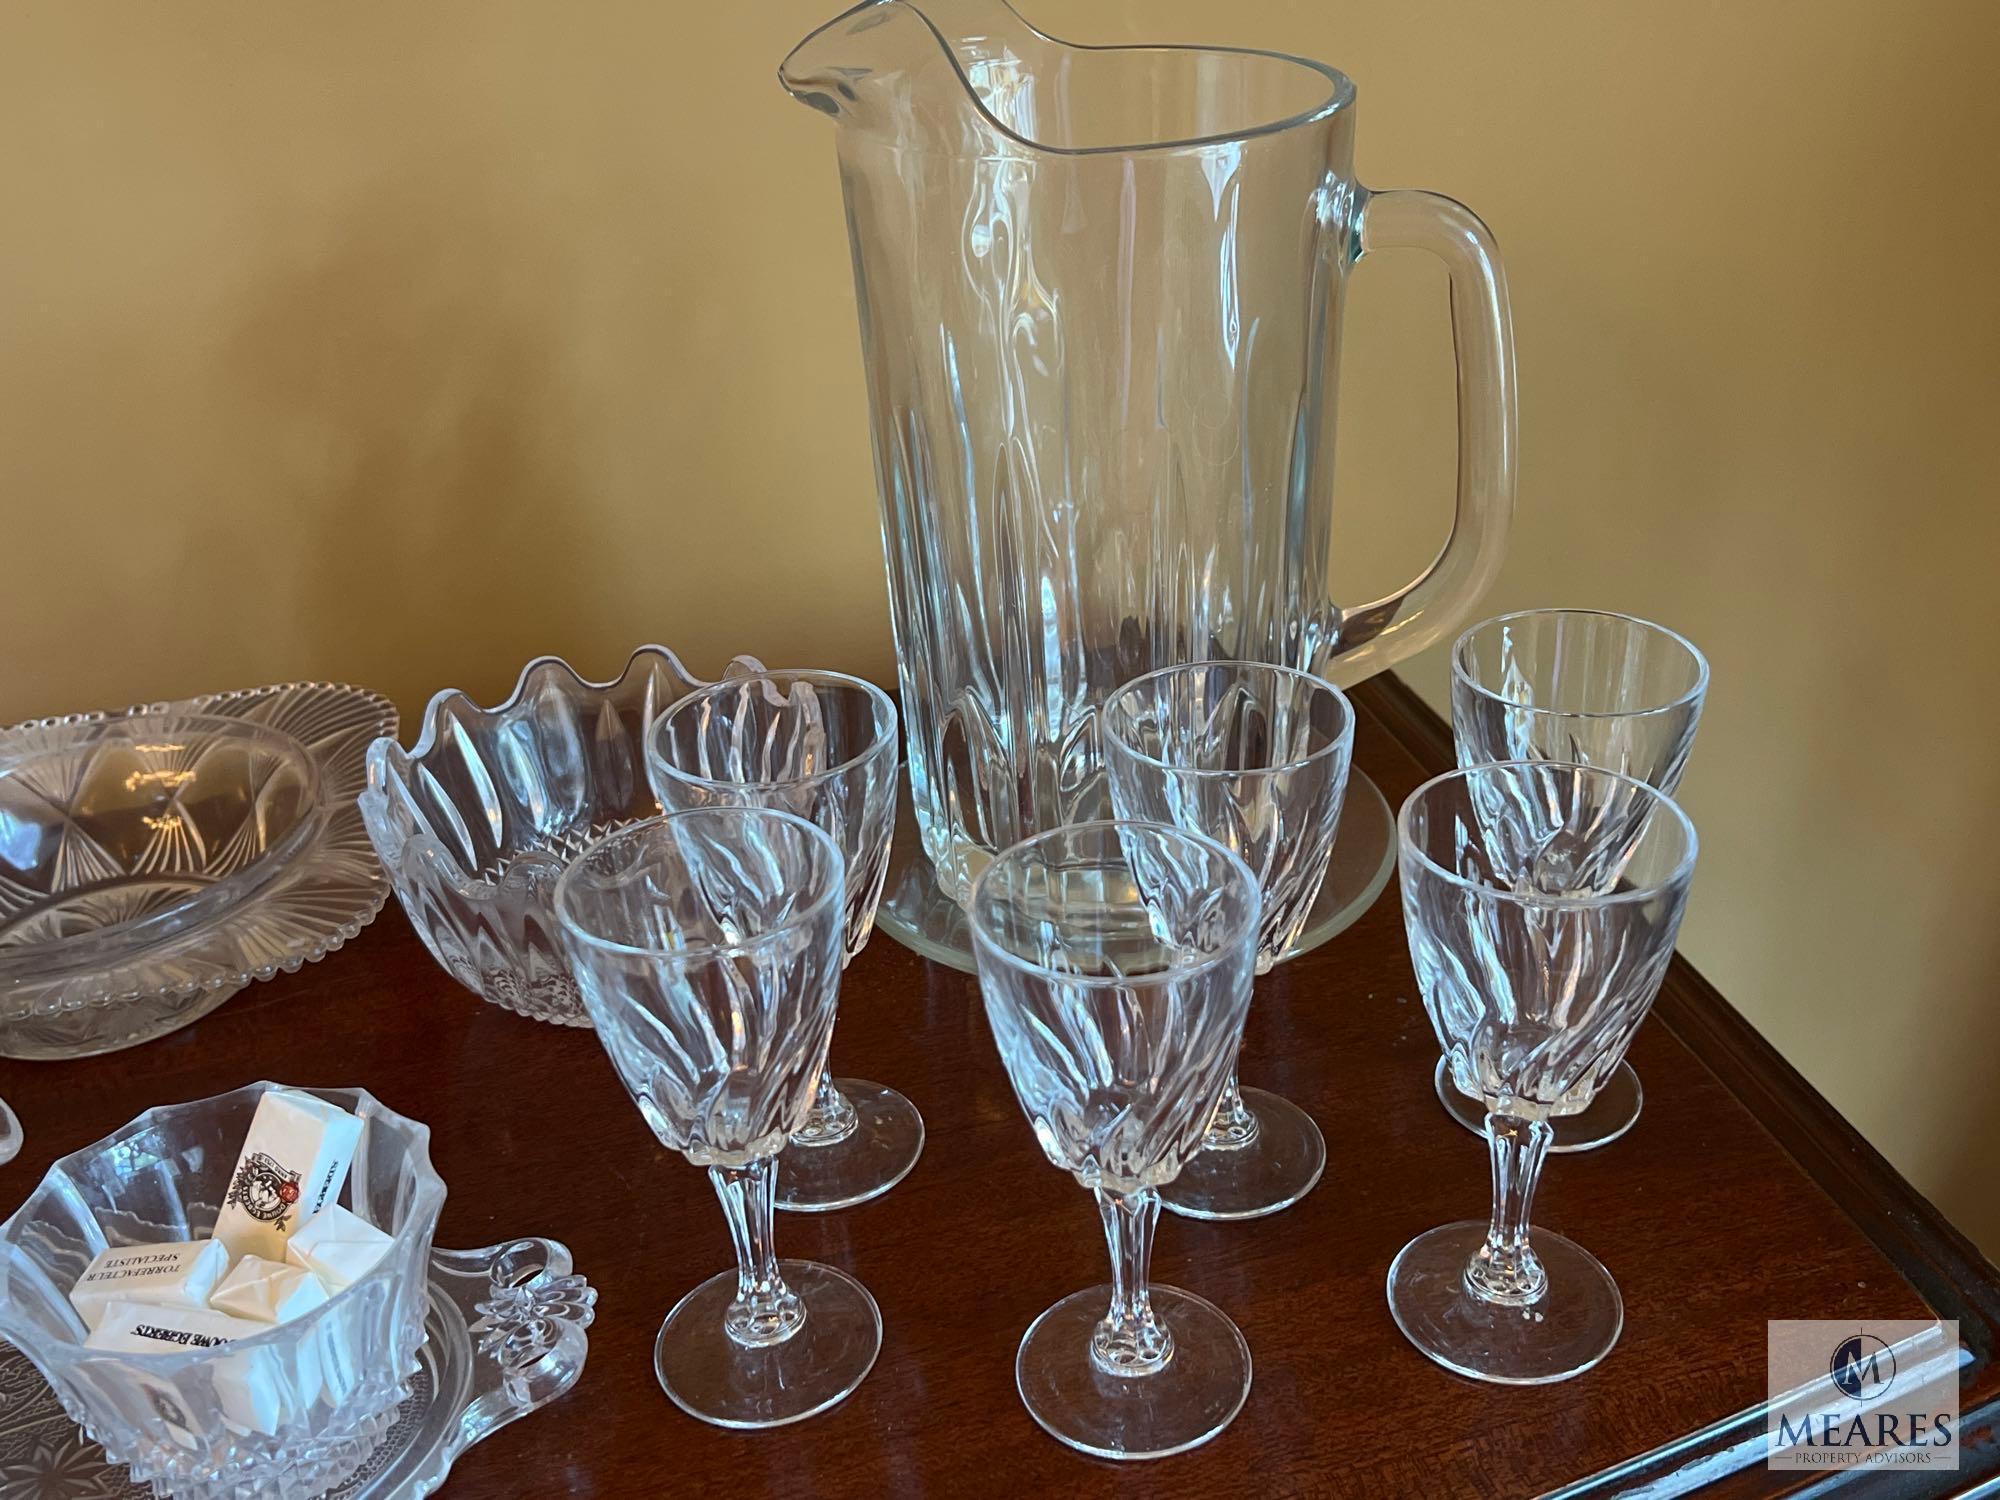 Glass Lot with Pitcher, Stem Glasses, Cream and Sugar